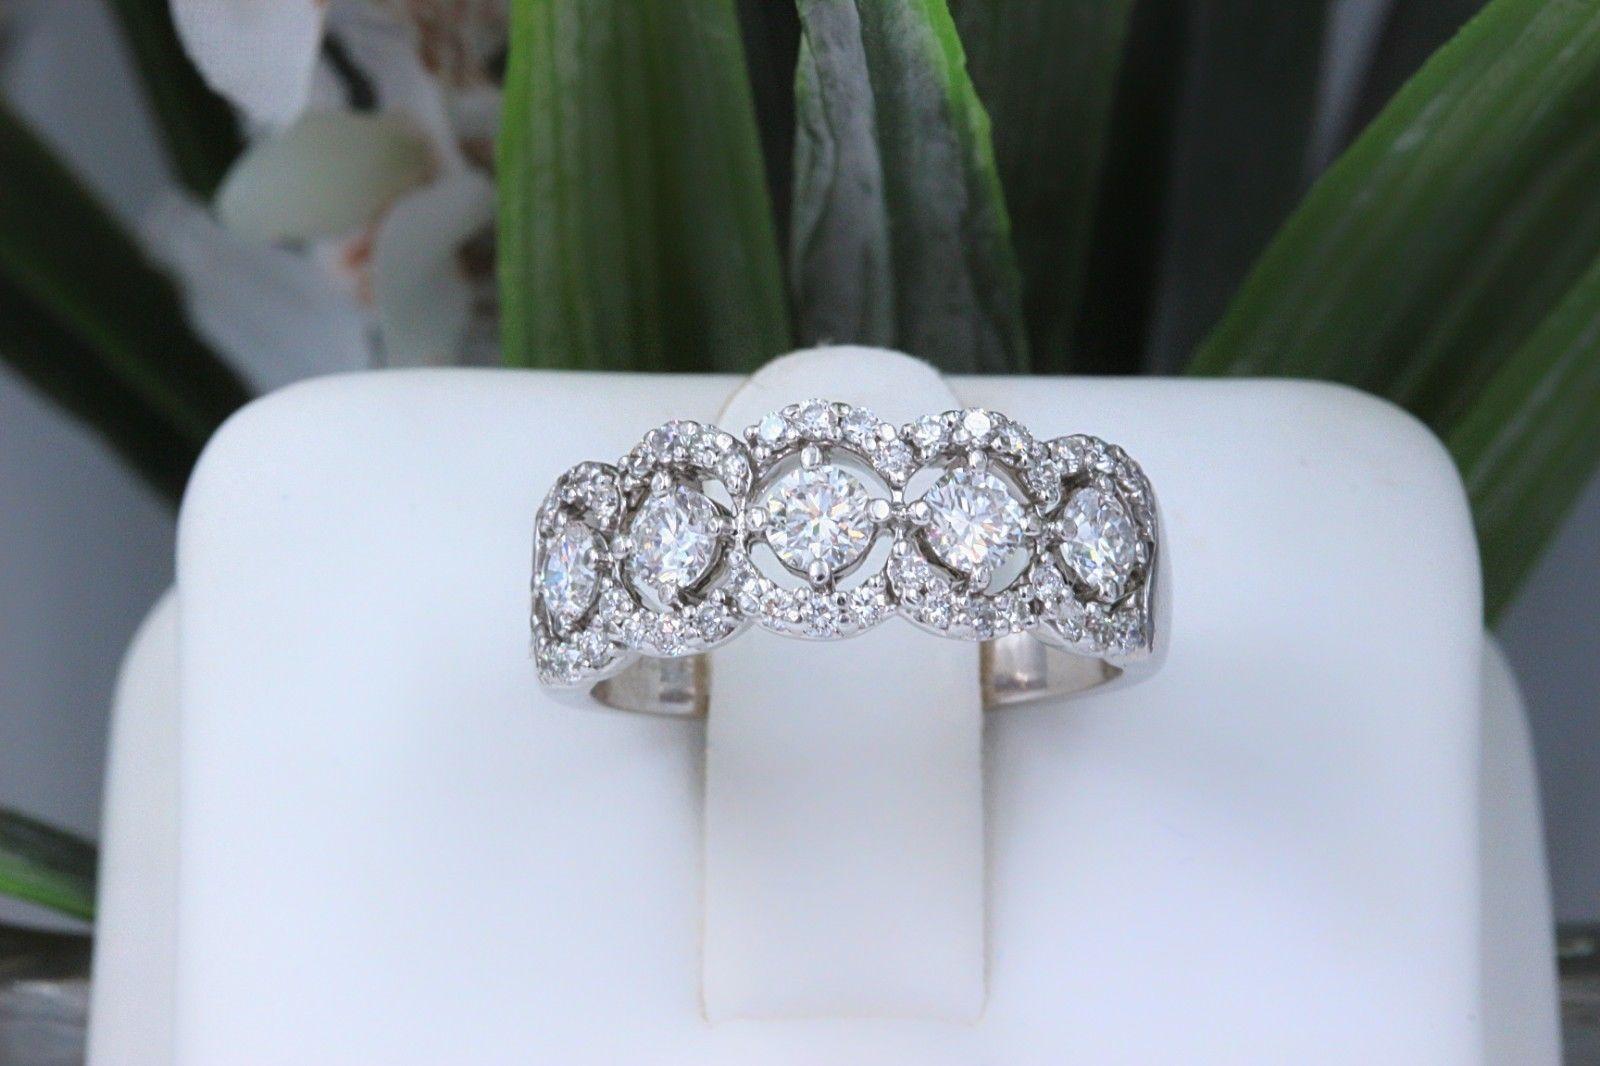 Diamond Wedding Band Ring Halo Design 14 Karat White Gold In Excellent Condition For Sale In San Diego, CA